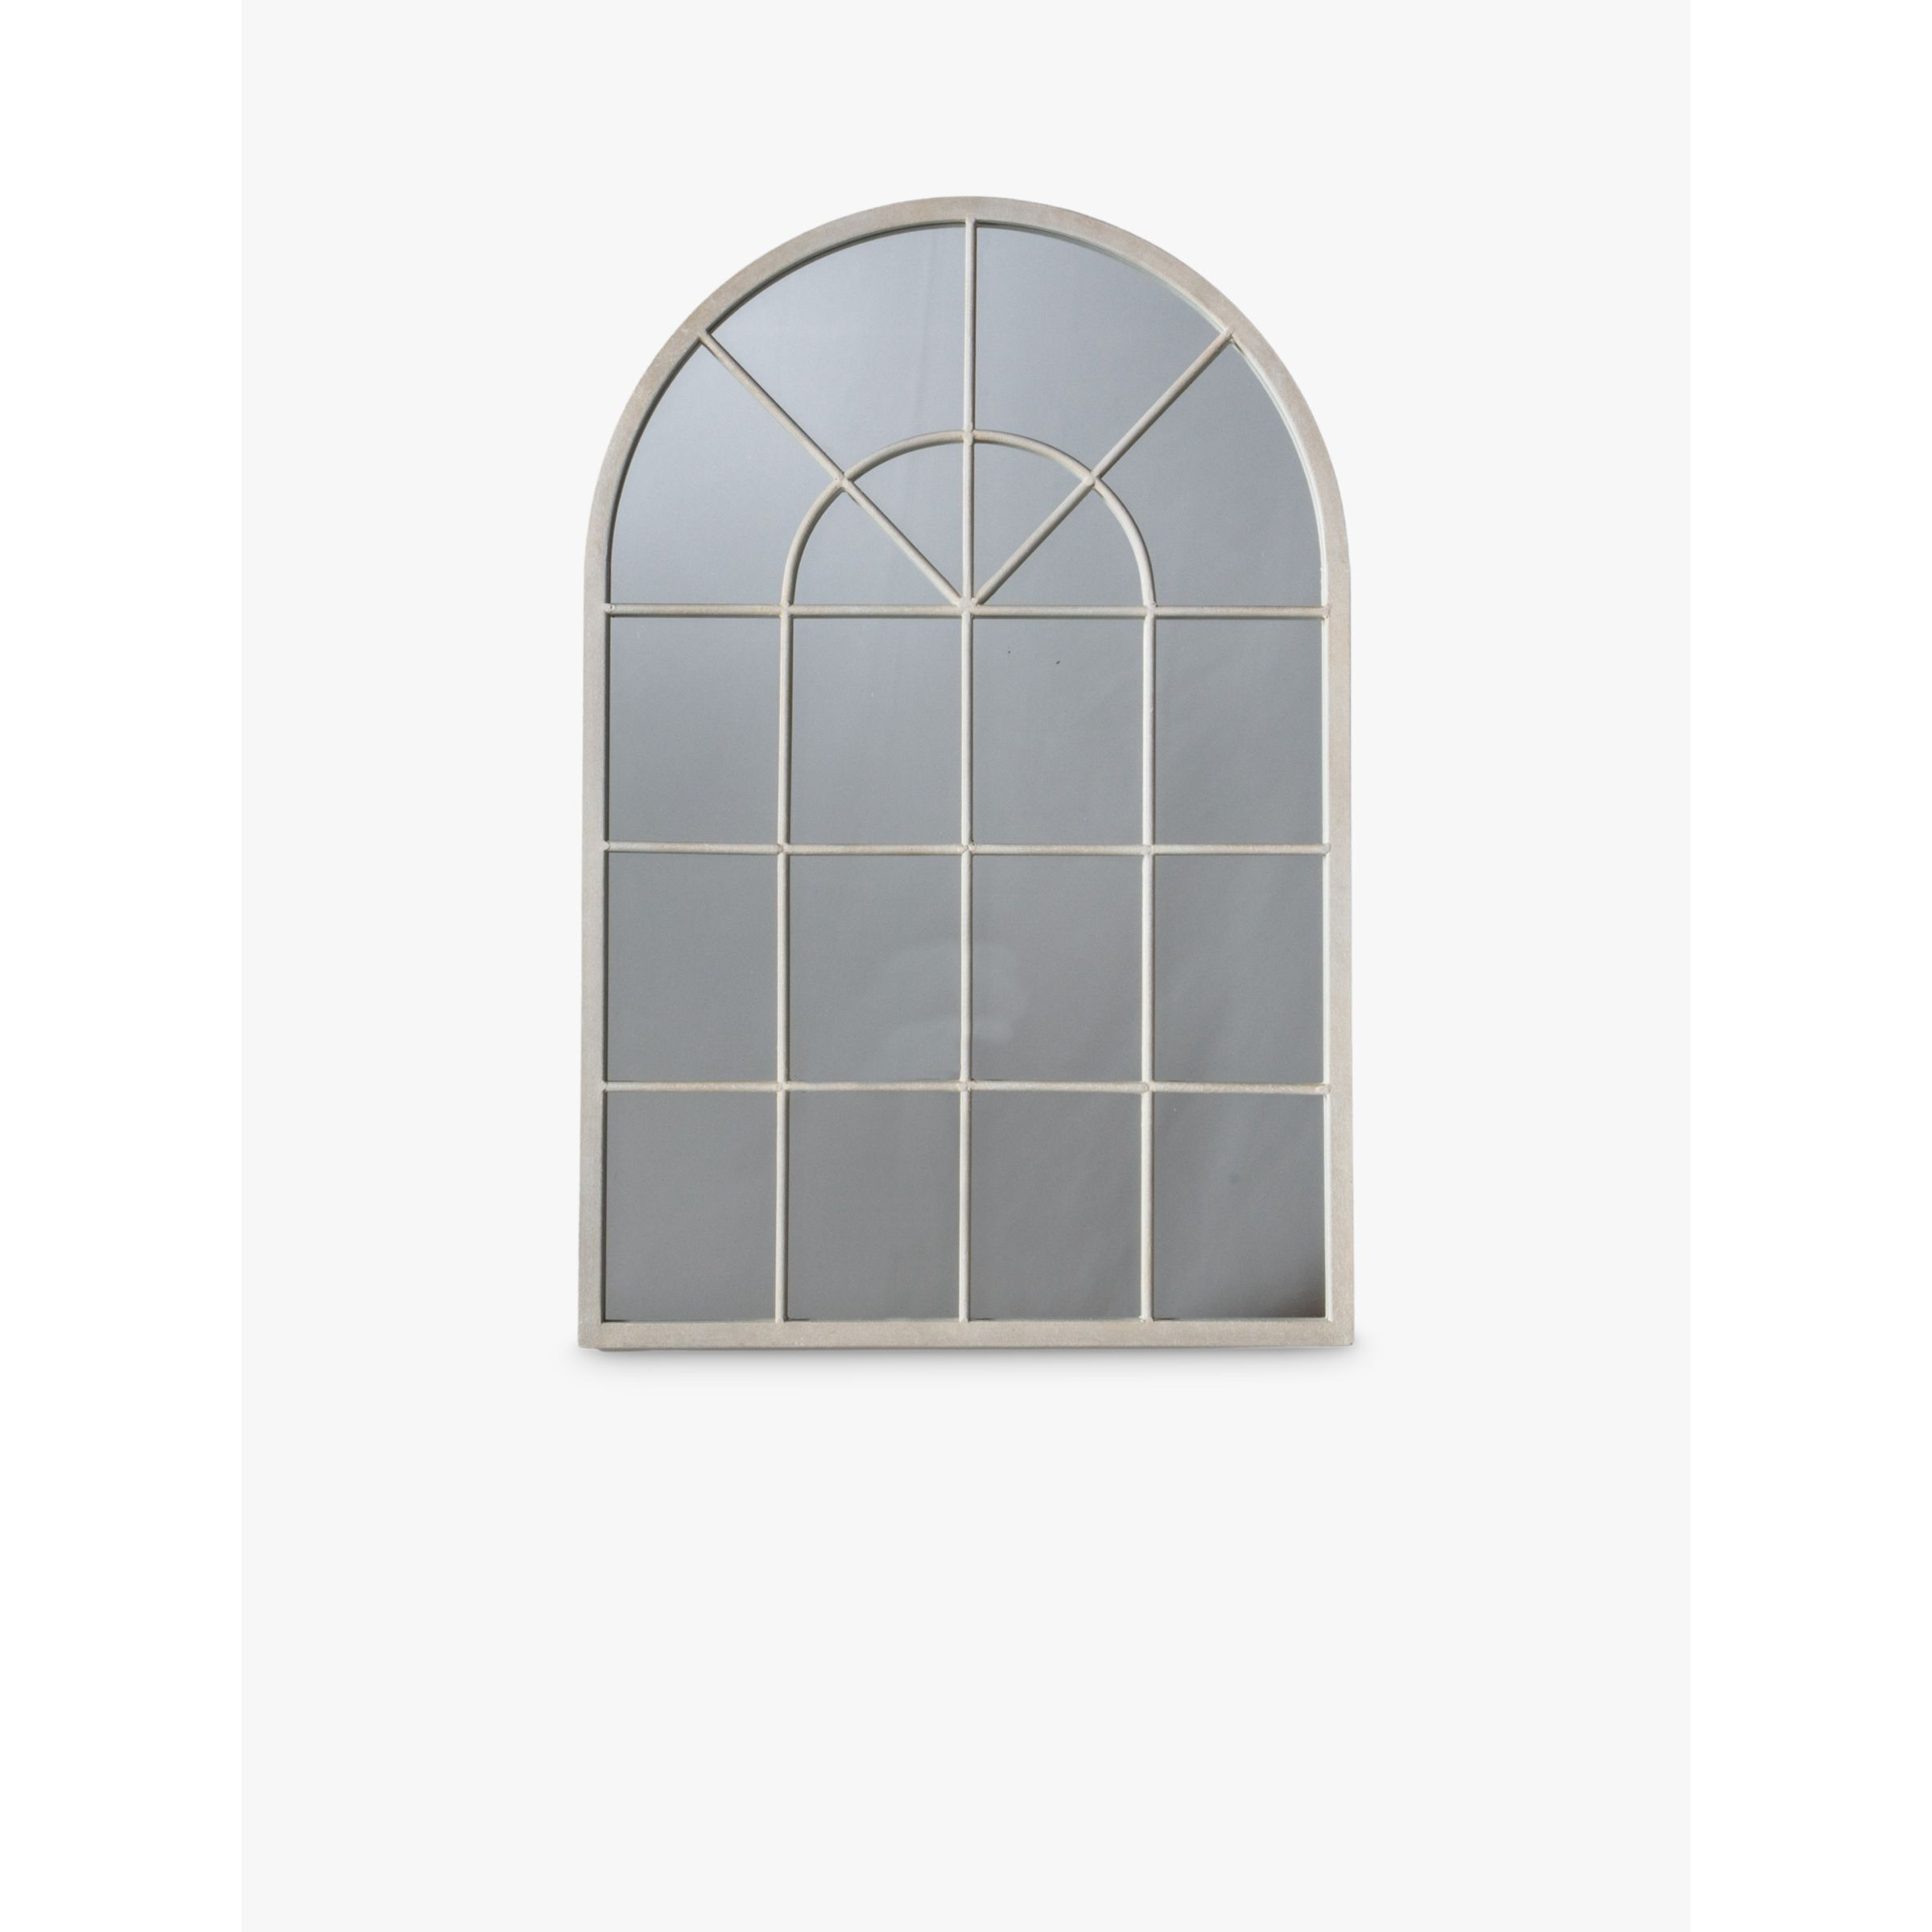 Gallery Direct Carmel Arched Metal Frame Window Wall Mirror, 90 x 60cm - image 1